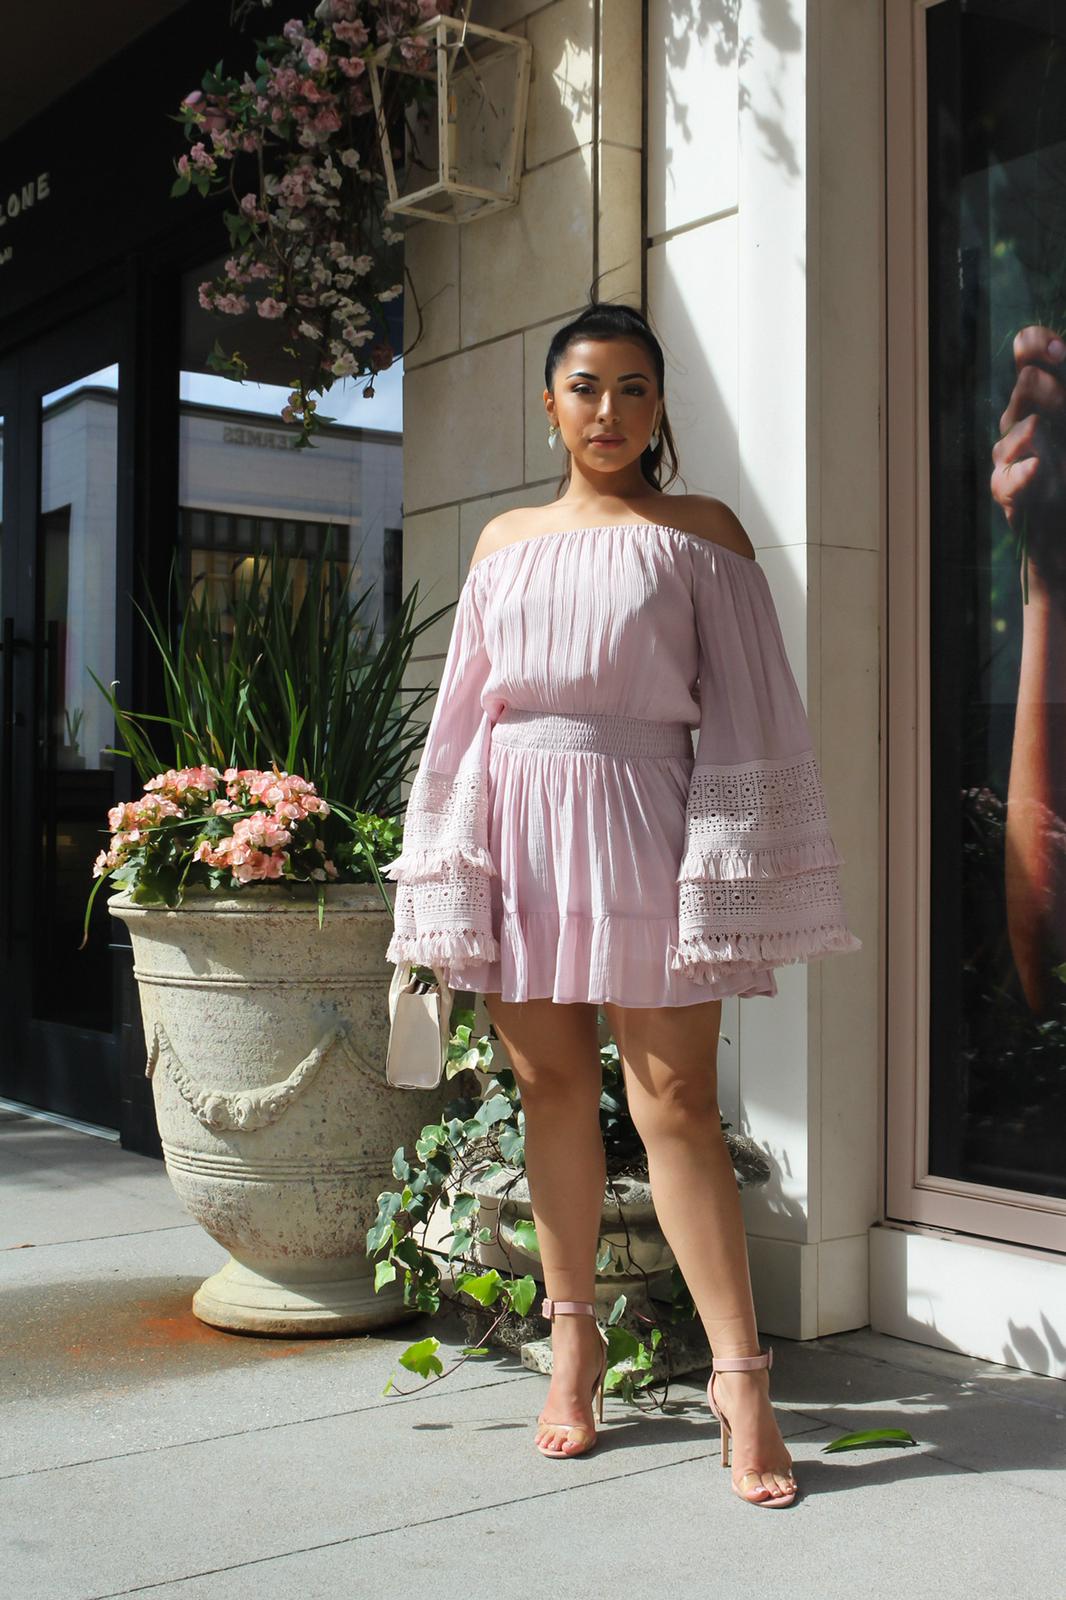 "Boho Chic: Pale Pink Flair Sleeve Dress for Effortless Style"